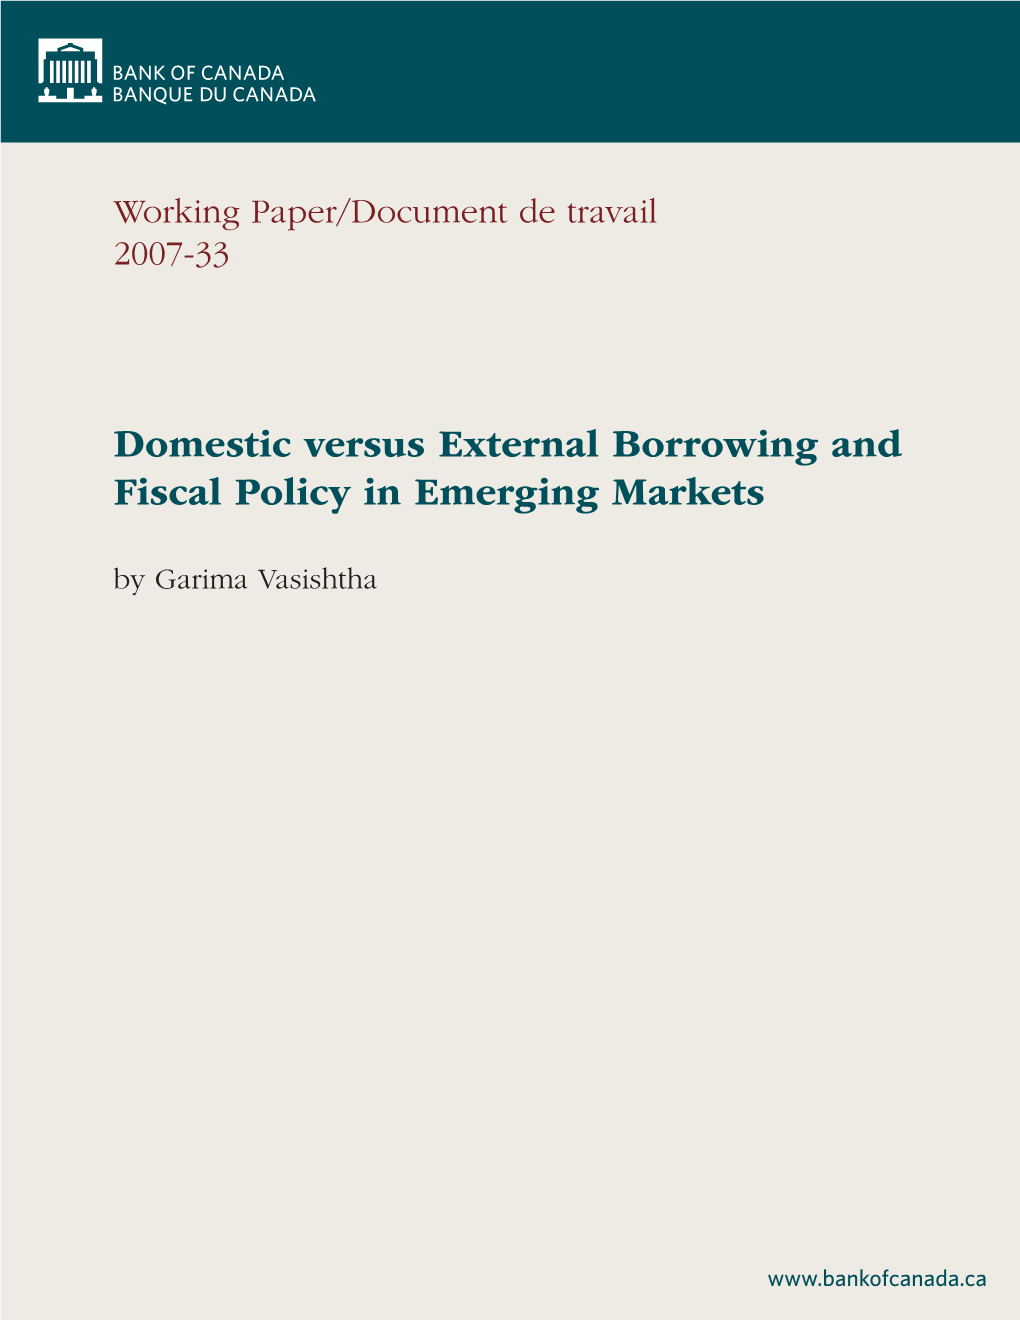 Domestic Versus External Borrowing and Fiscal Policy in Emerging Markets by Garima Vasishtha